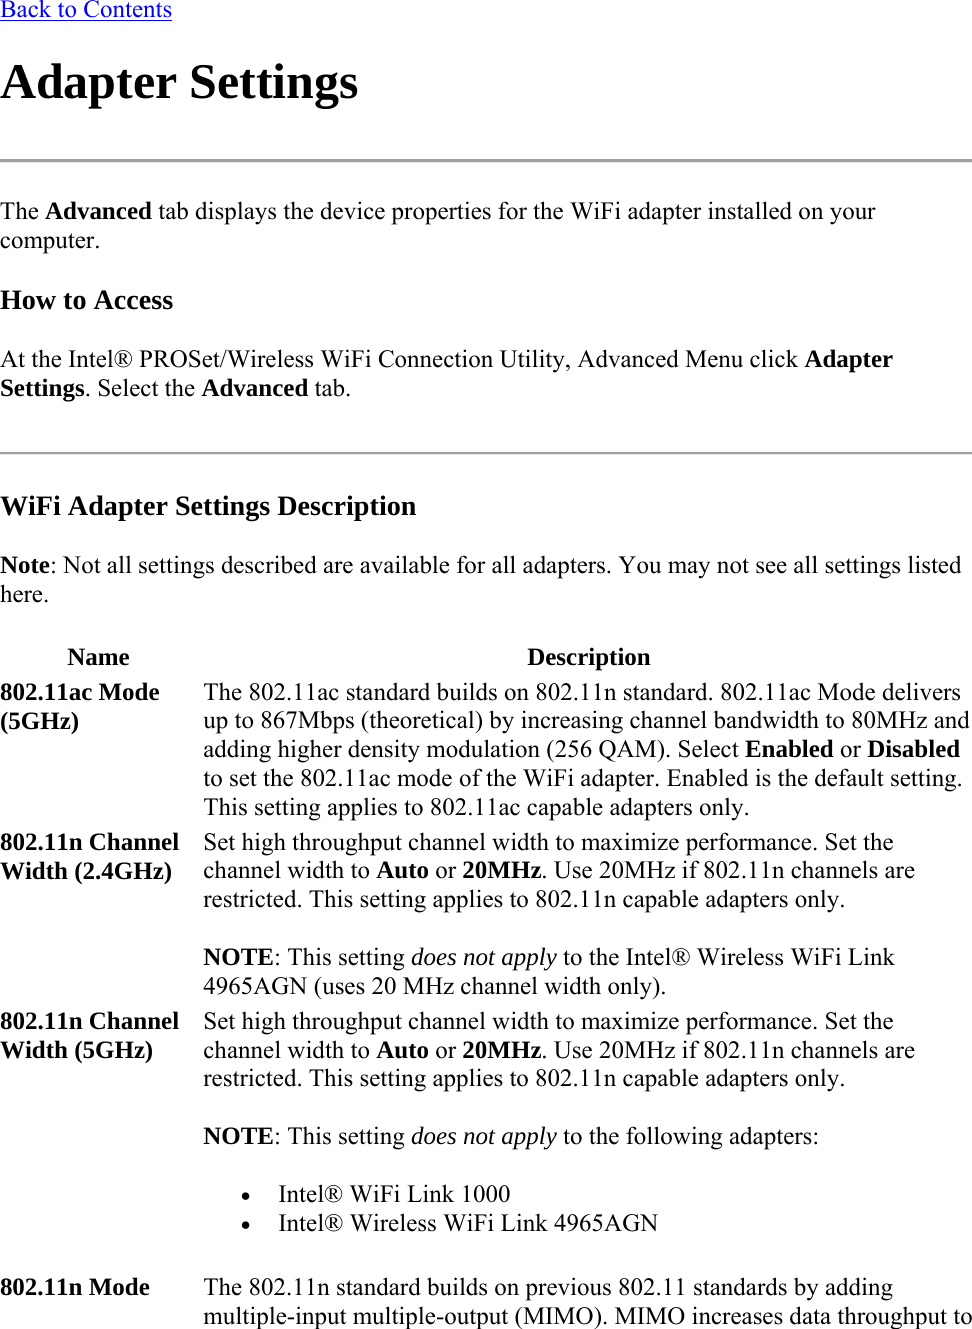 Back to Contents Adapter Settings  The Advanced tab displays the device properties for the WiFi adapter installed on your computer.  How to Access At the Intel® PROSet/Wireless WiFi Connection Utility, Advanced Menu click Adapter Settings. Select the Advanced tab.  WiFi Adapter Settings Description Note: Not all settings described are available for all adapters. You may not see all settings listed here.  Name Description 802.11ac Mode  (5GHz) The 802.11ac standard builds on 802.11n standard. 802.11ac Mode delivers up to 867Mbps (theoretical) by increasing channel bandwidth to 80MHz and adding higher density modulation (256 QAM). Select Enabled or Disabled to set the 802.11ac mode of the WiFi adapter. Enabled is the default setting. This setting applies to 802.11ac capable adapters only.  802.11n Channel Width (2.4GHz)  Set high throughput channel width to maximize performance. Set the channel width to Auto or 20MHz. Use 20MHz if 802.11n channels are restricted. This setting applies to 802.11n capable adapters only.  NOTE: This setting does not apply to the Intel® Wireless WiFi Link 4965AGN (uses 20 MHz channel width only). 802.11n Channel Width (5GHz)  Set high throughput channel width to maximize performance. Set the channel width to Auto or 20MHz. Use 20MHz if 802.11n channels are restricted. This setting applies to 802.11n capable adapters only.  NOTE: This setting does not apply to the following adapters:  Intel® WiFi Link 1000   Intel® Wireless WiFi Link 4965AGN 802.11n Mode   The 802.11n standard builds on previous 802.11 standards by adding multiple-input multiple-output (MIMO). MIMO increases data throughput to 